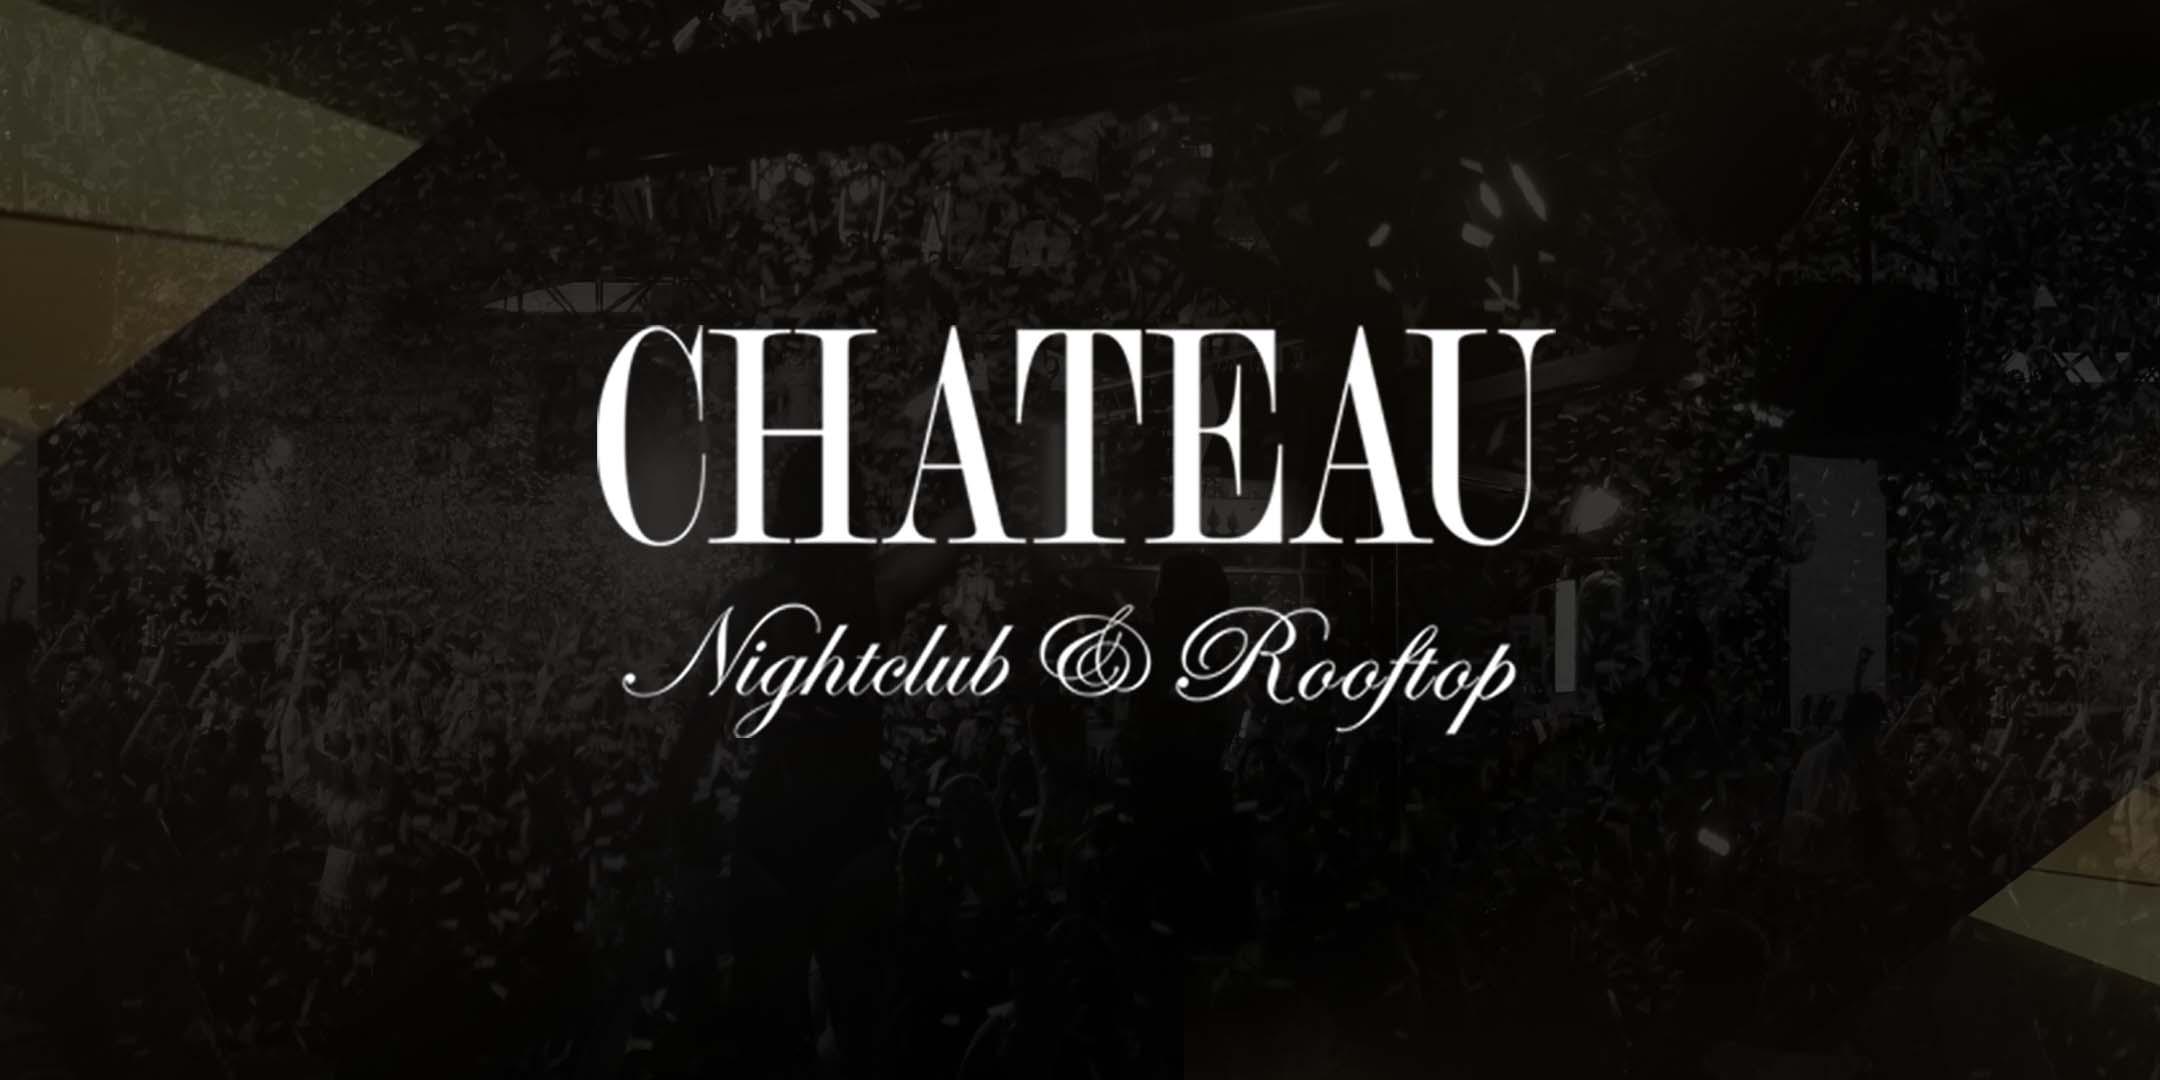 Chateau Nightclub & Rooftop - General Admission WEEKEND TICKETS